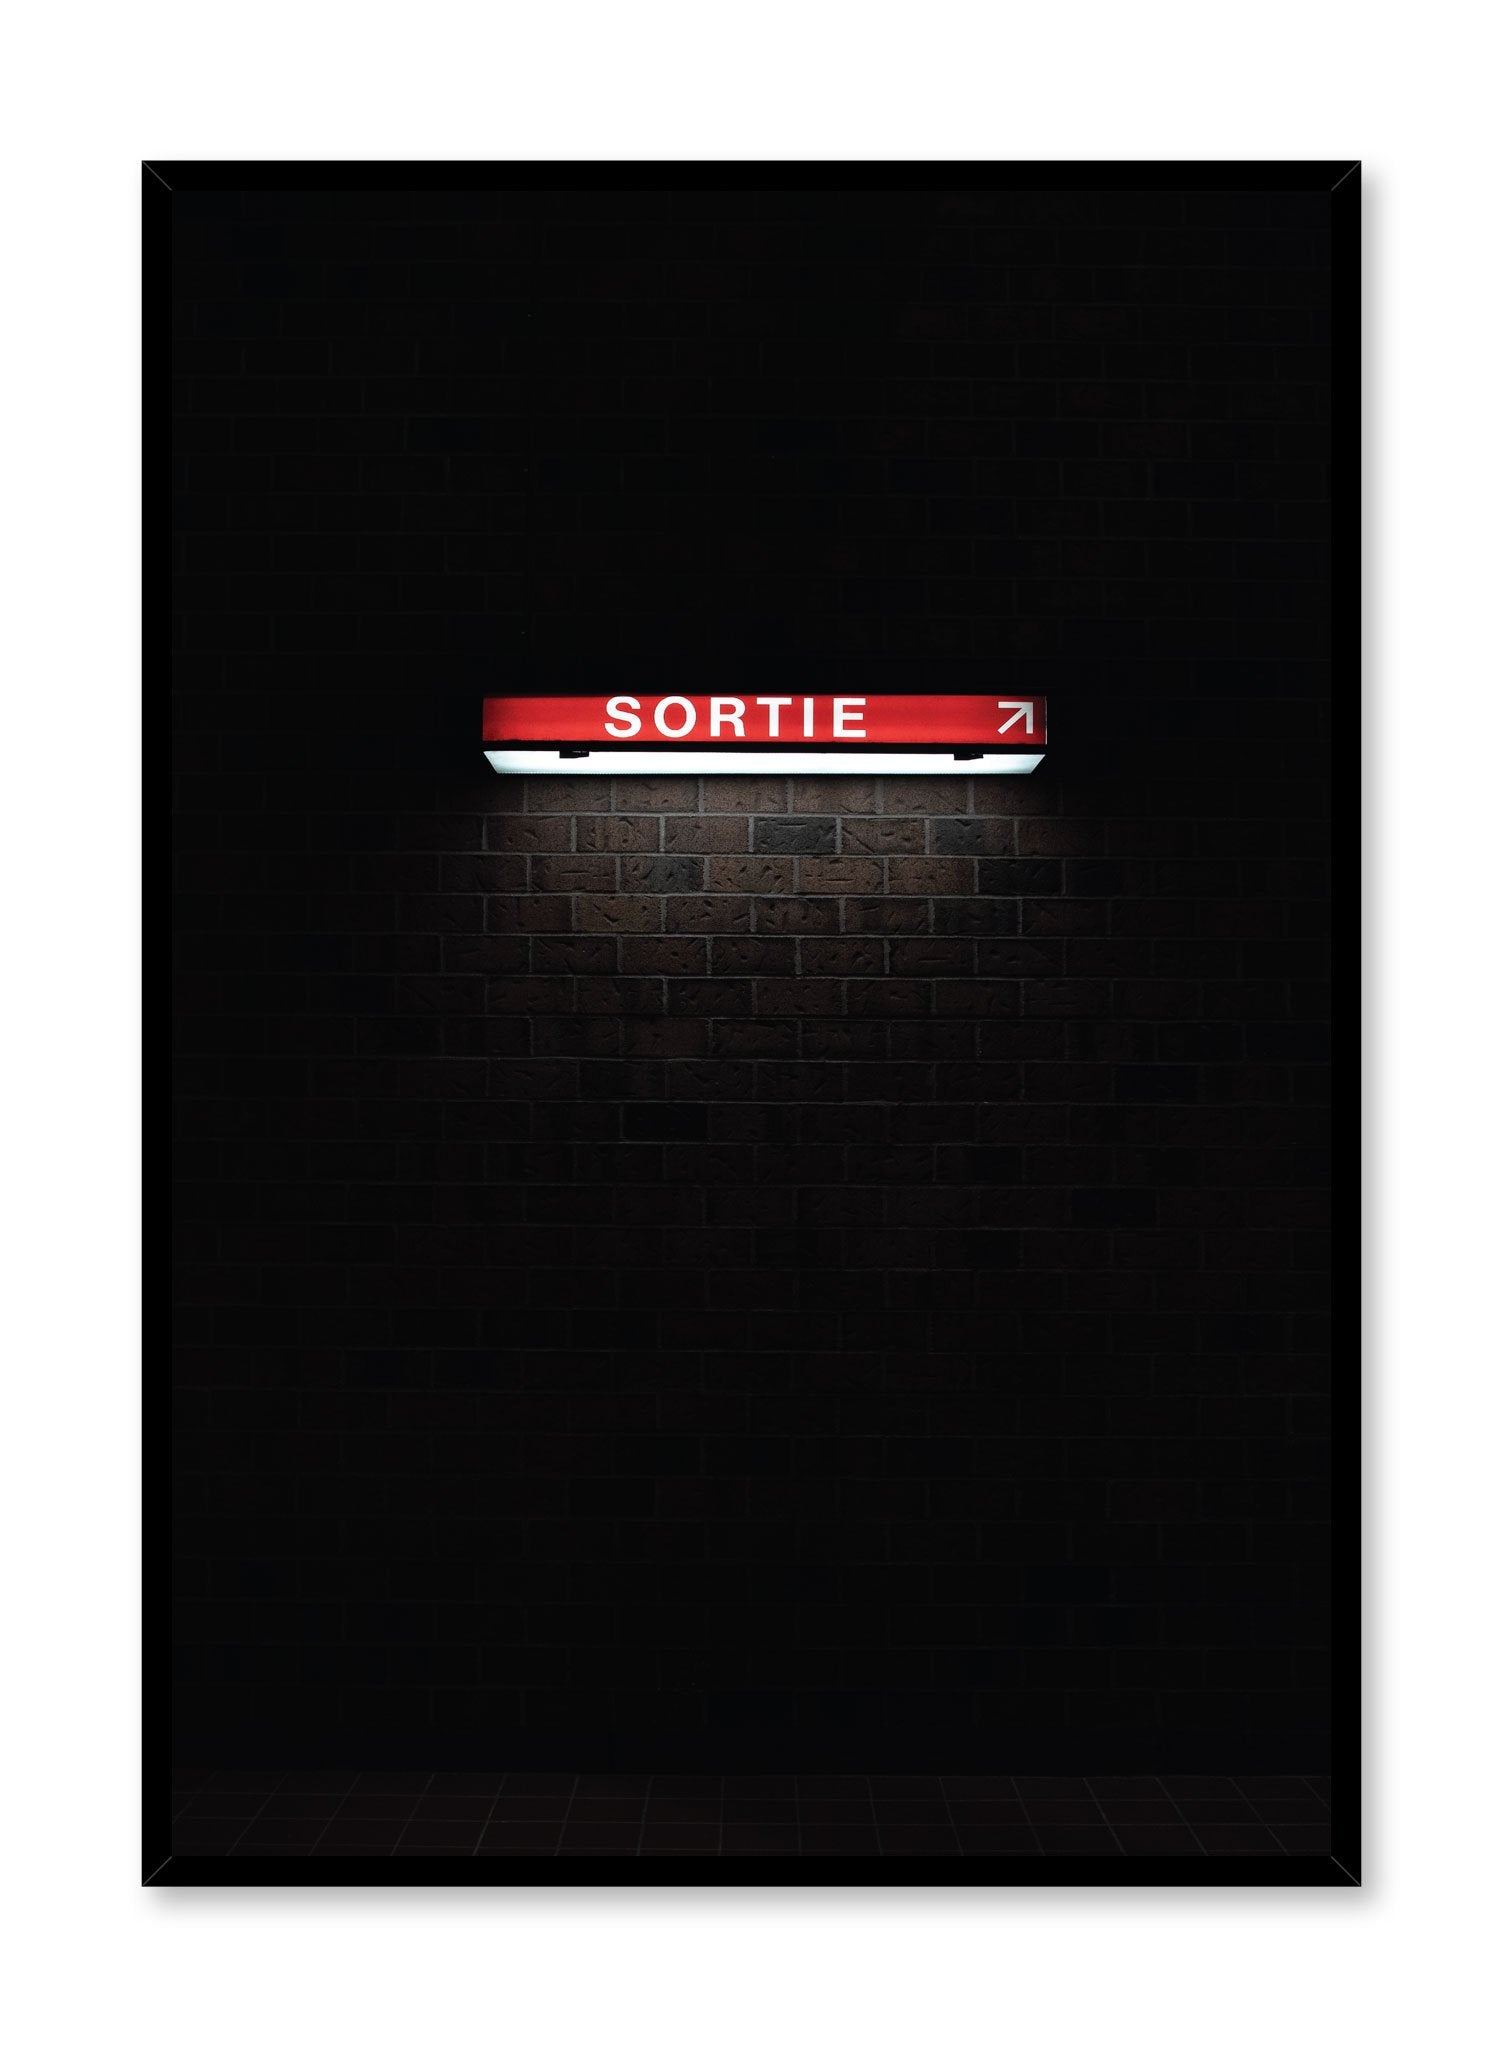 Minimalist design poster by Opposite Wall with urban street photography of Montreal metro sortie exit sign